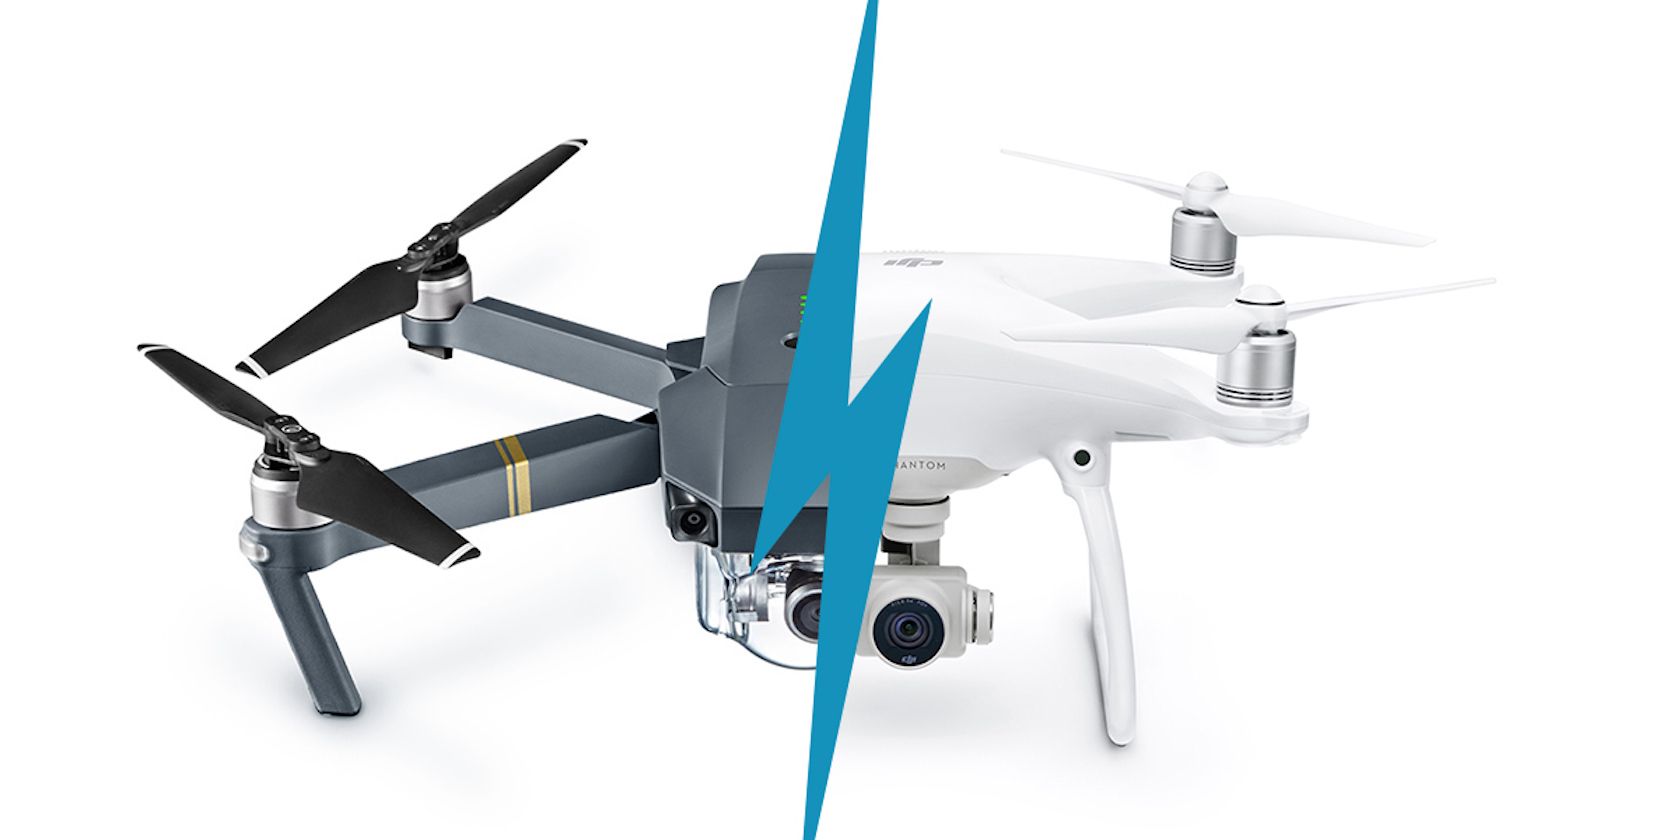 Enter to Win a Premium Drone in Our LimitedTime DJI Giveaway